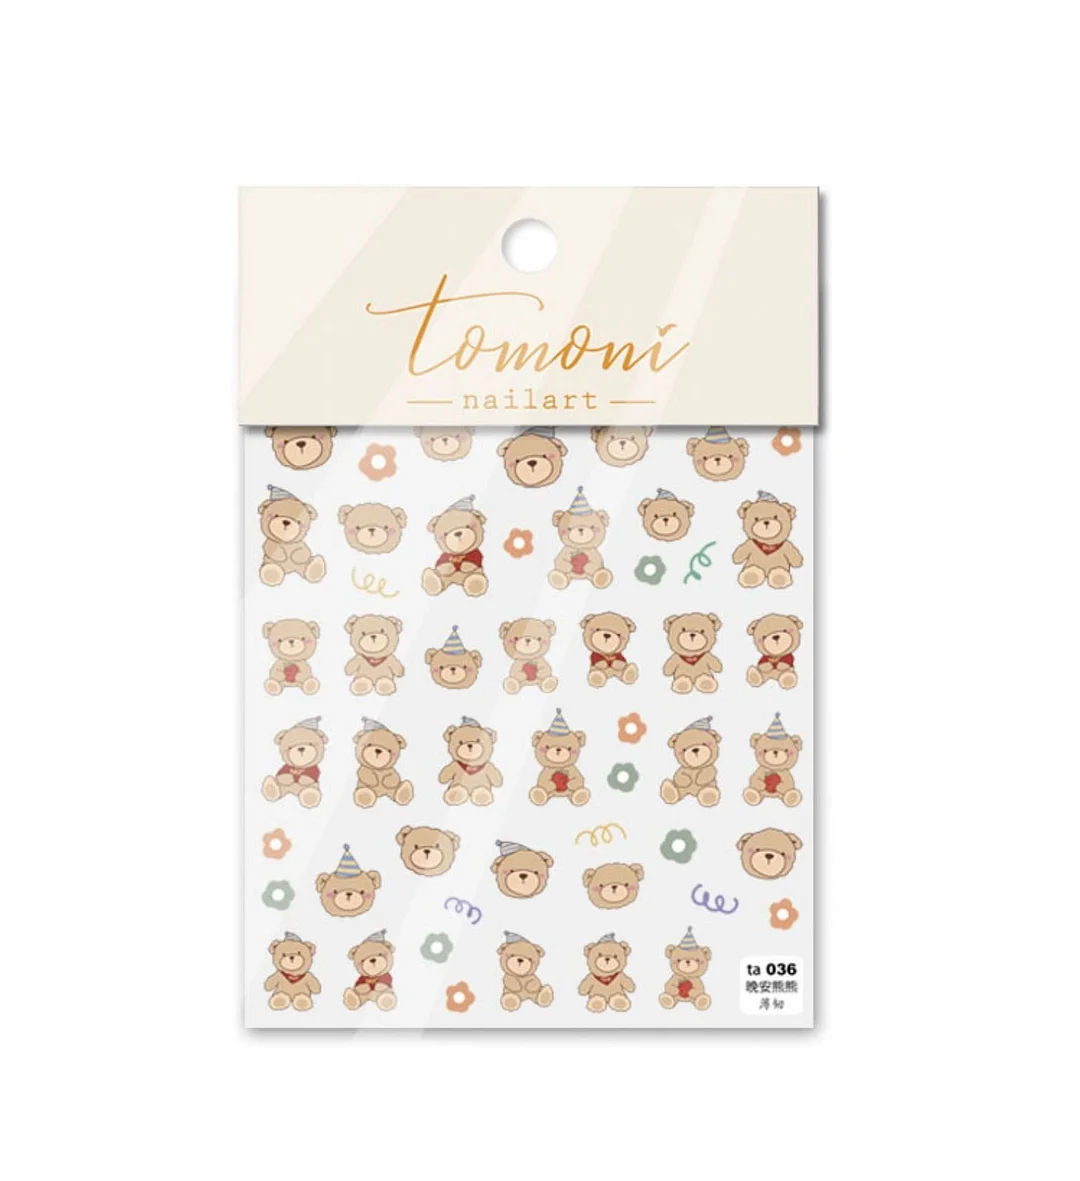 Beautizon Colorful Teddy bear High Quality 3D Engraved Nail Stickers Nail Art Decorations Nail Decals Design